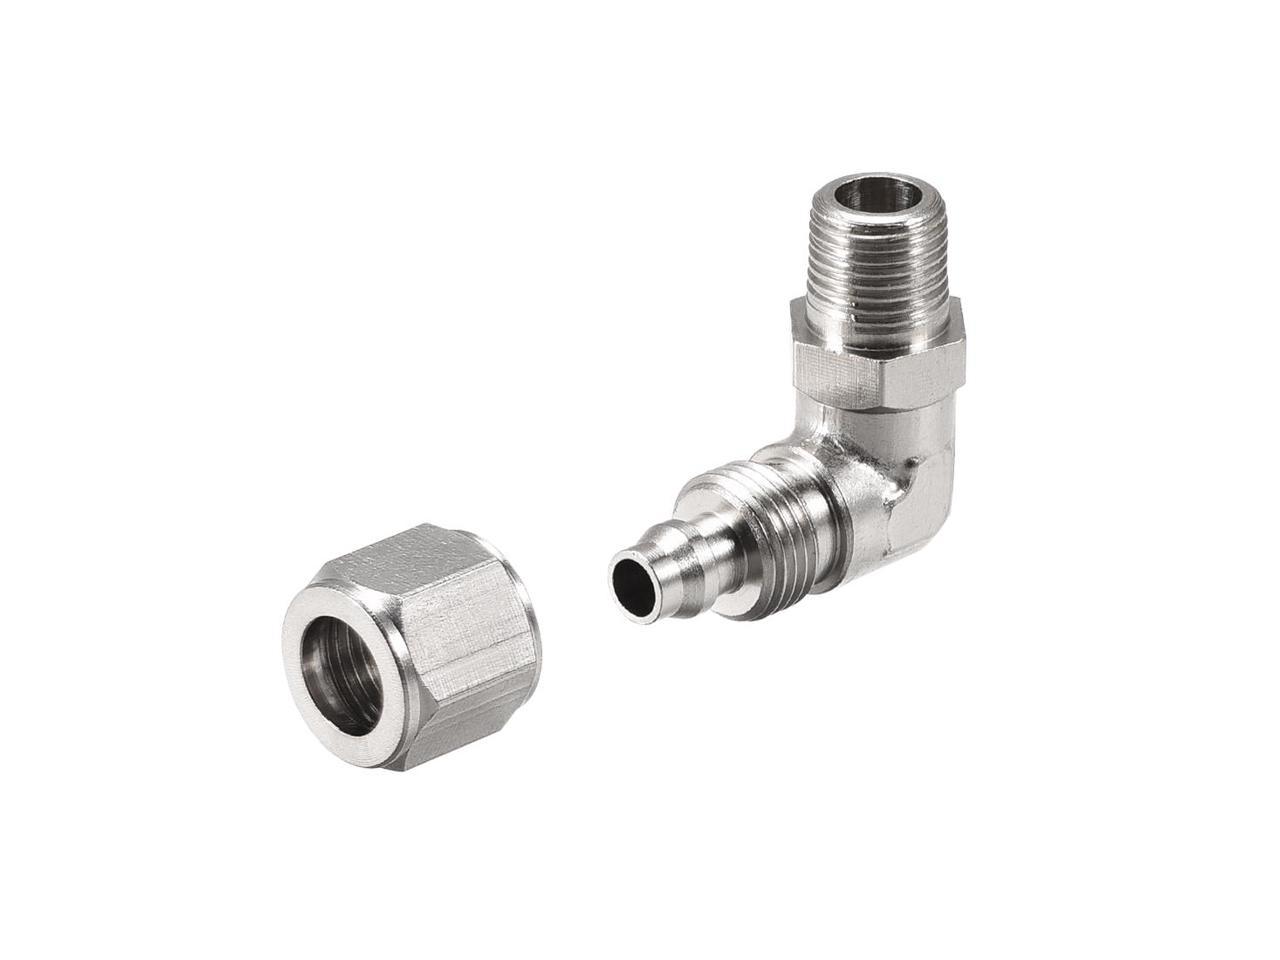 Details about   4mm Tube OD to 1/8PT Male Thread Elbow Quick Fittings Nickel Plated Copper 2Pcs 